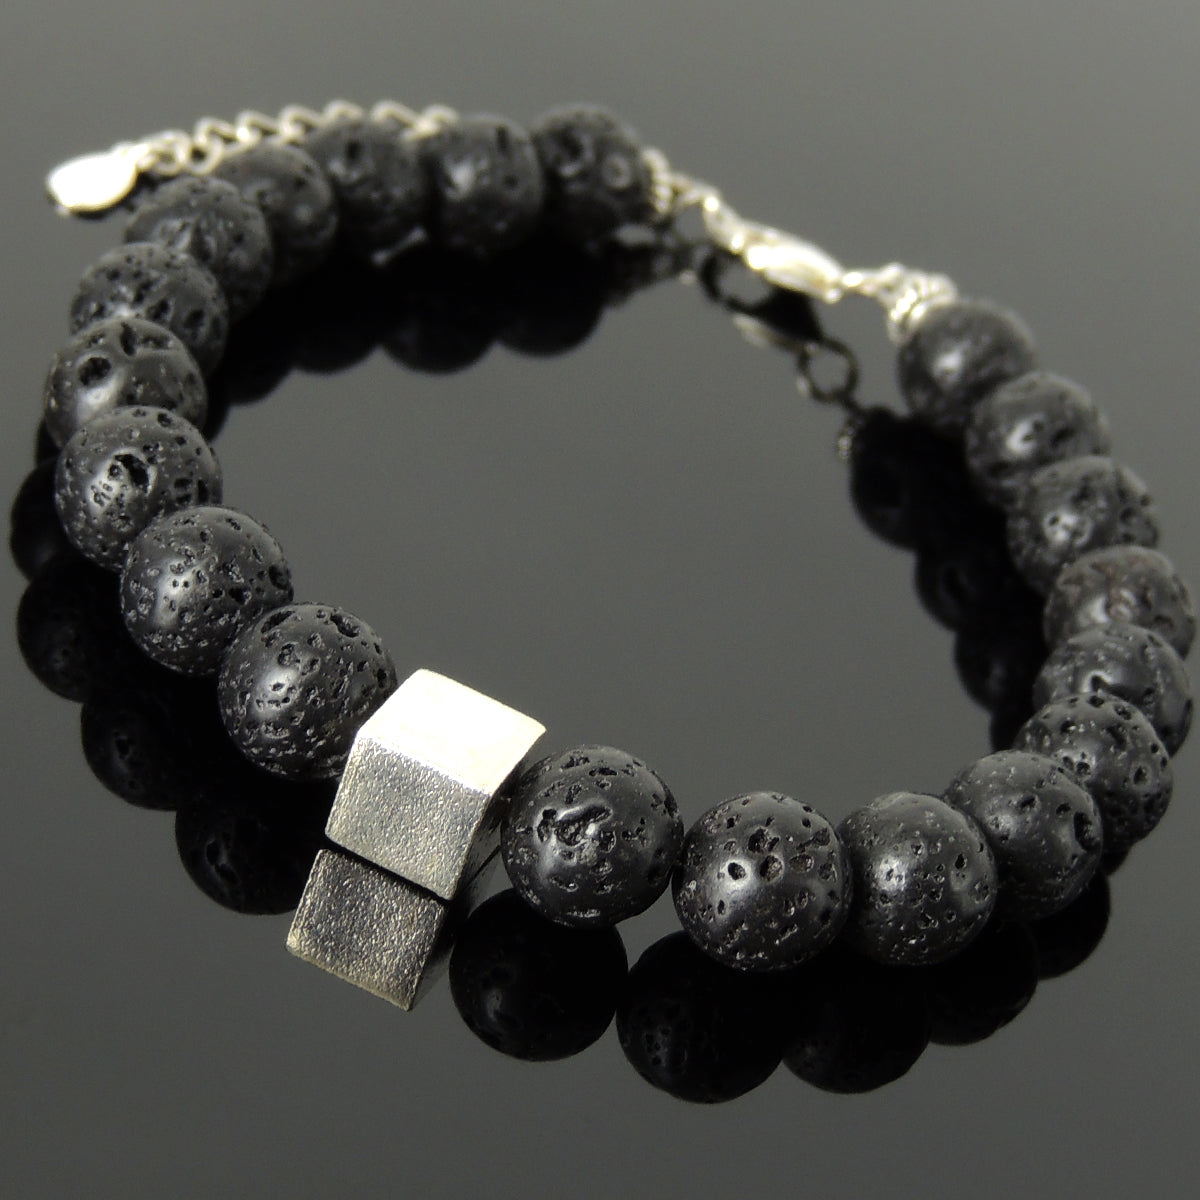 8mm Lava Rock Healing Stone Bracelet with Stability Geometric Balance Cube S925 Sterling Silver Chain & Clasp - Handmade by Gem & Silver BR1427